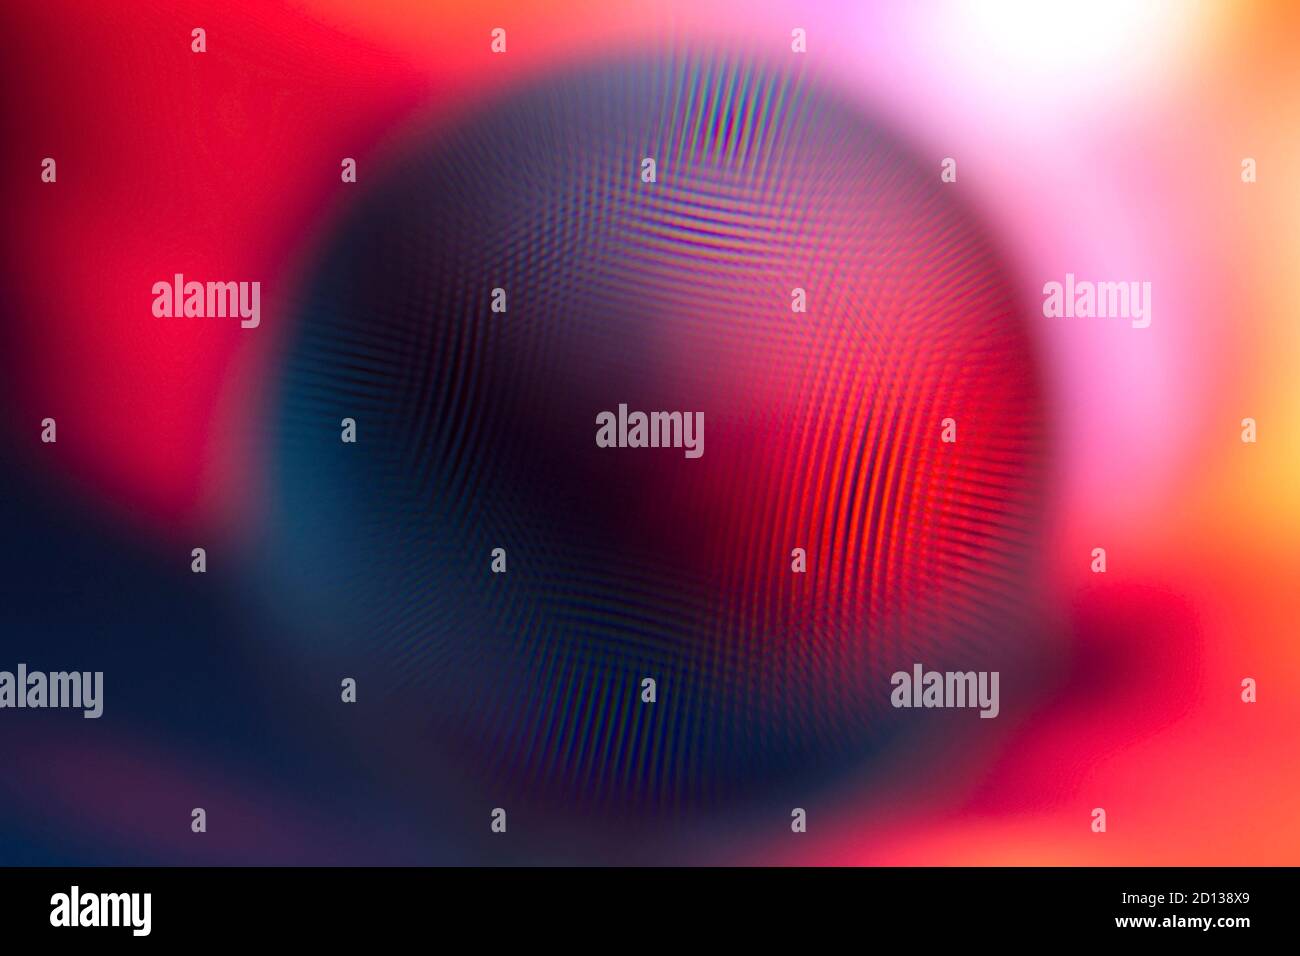 Abstract blurry background with seamless objects. Abstract objects in blur. Stock Photo